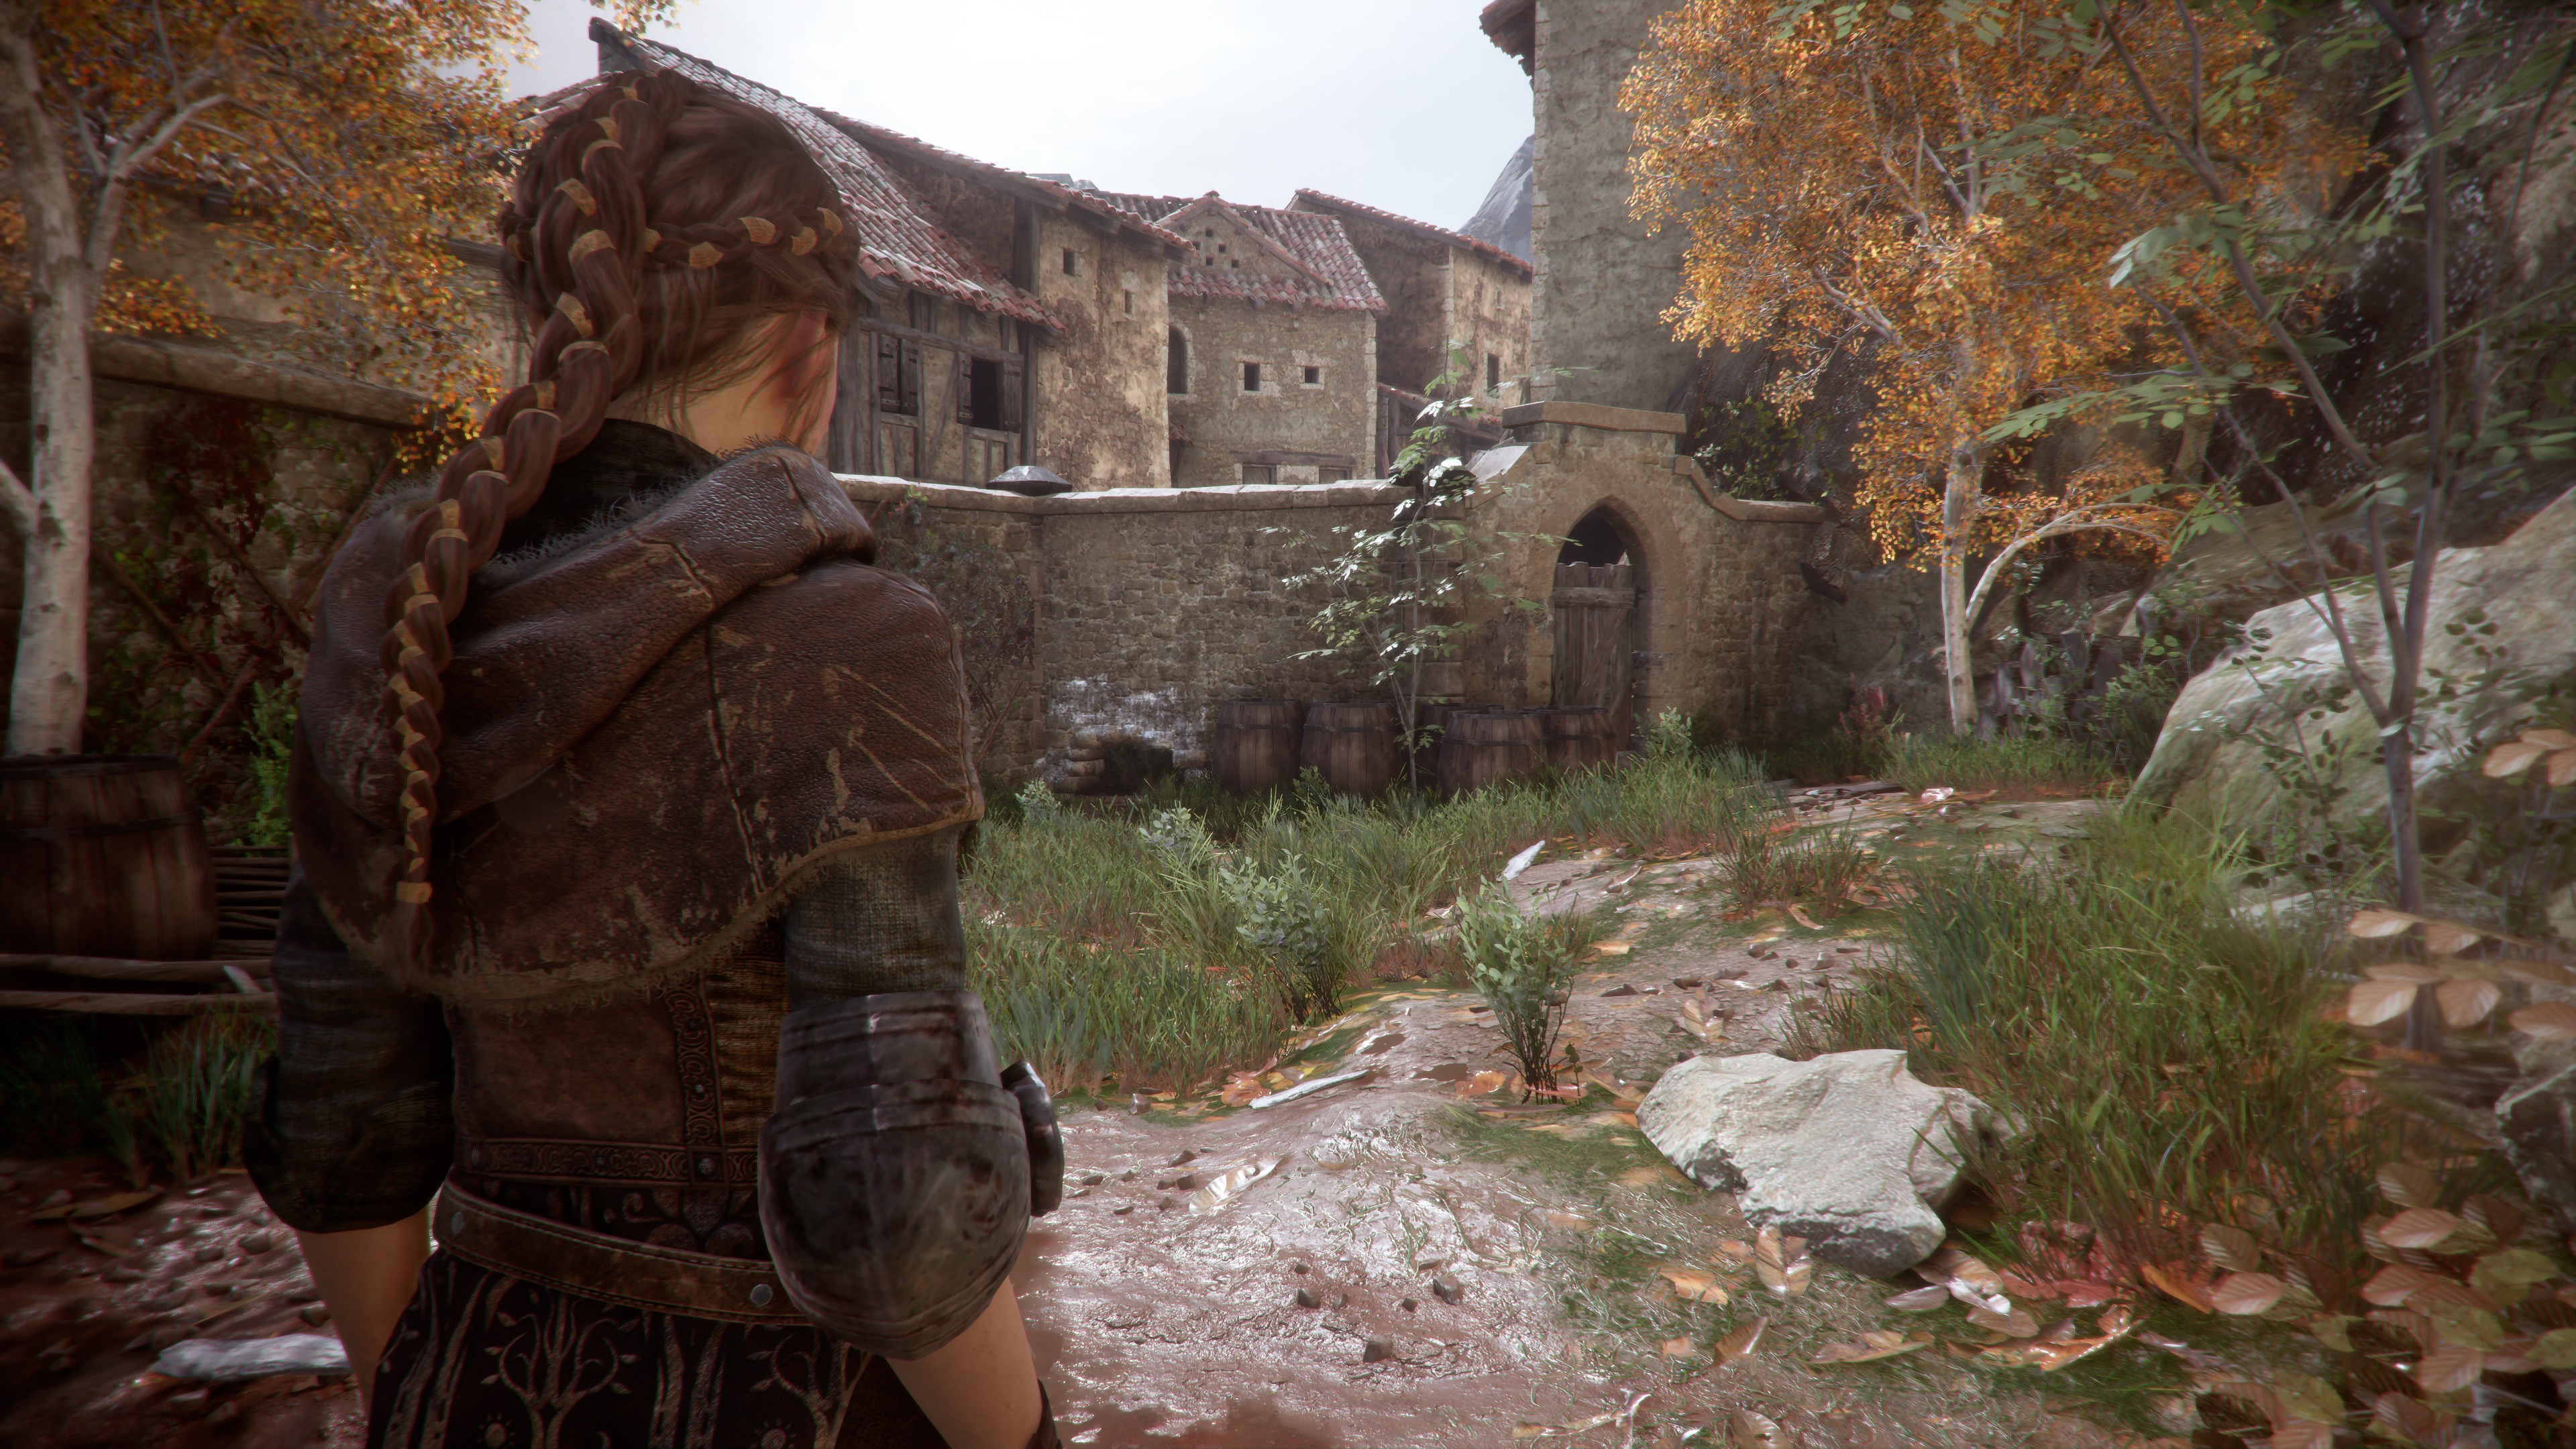 Media asset in full size related to 3dfxzone.it news item entitled as follows: Gameplay footage e screenshots in 4K del game A Plague Tale: Innocence | Image Name: news29593_A-Plague-Tale-Innocence-Screenshot_3.jpg